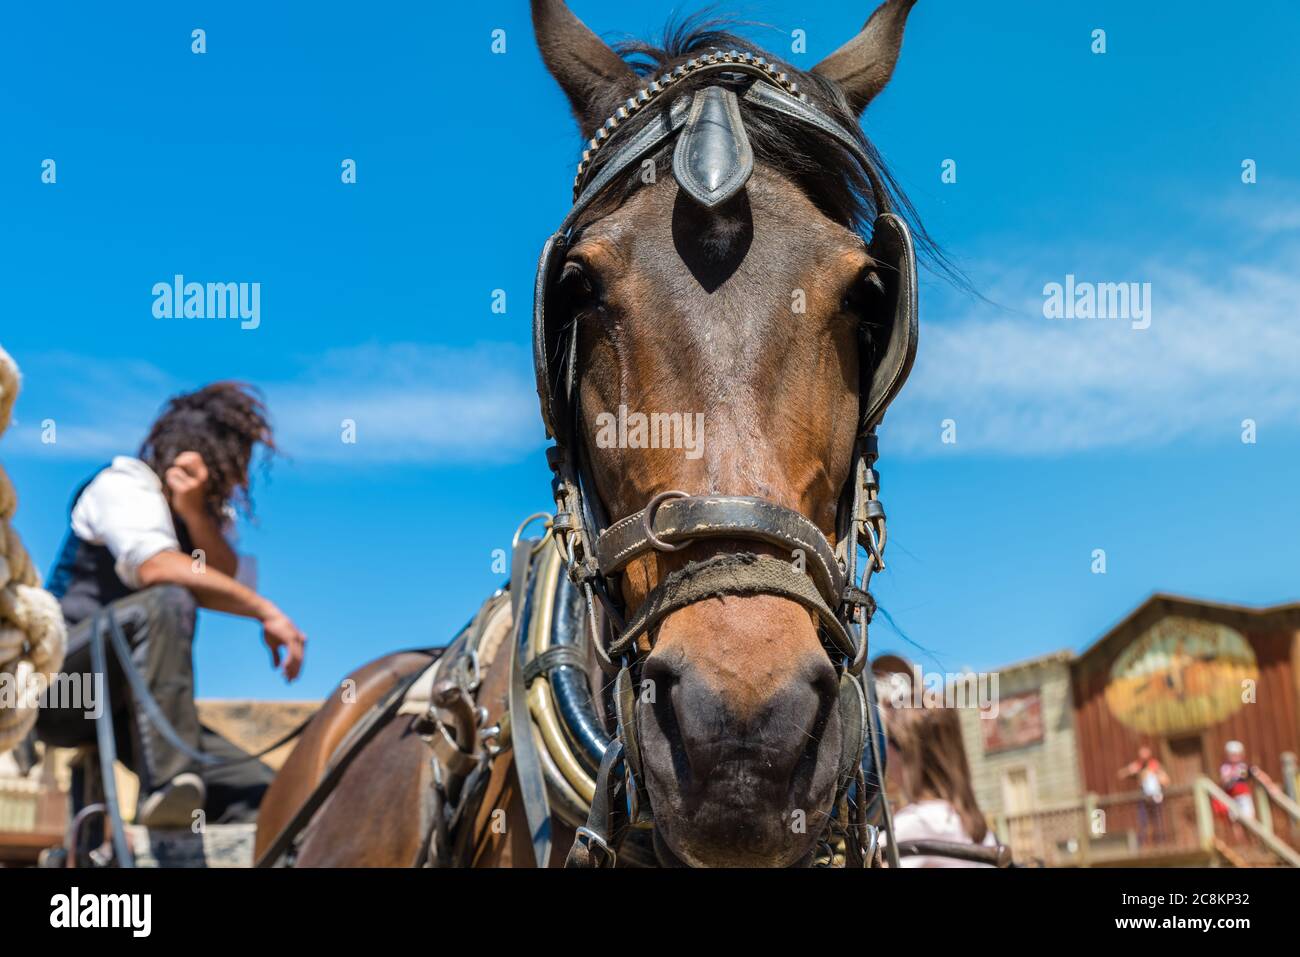 Working horse with blinders Stock Photo